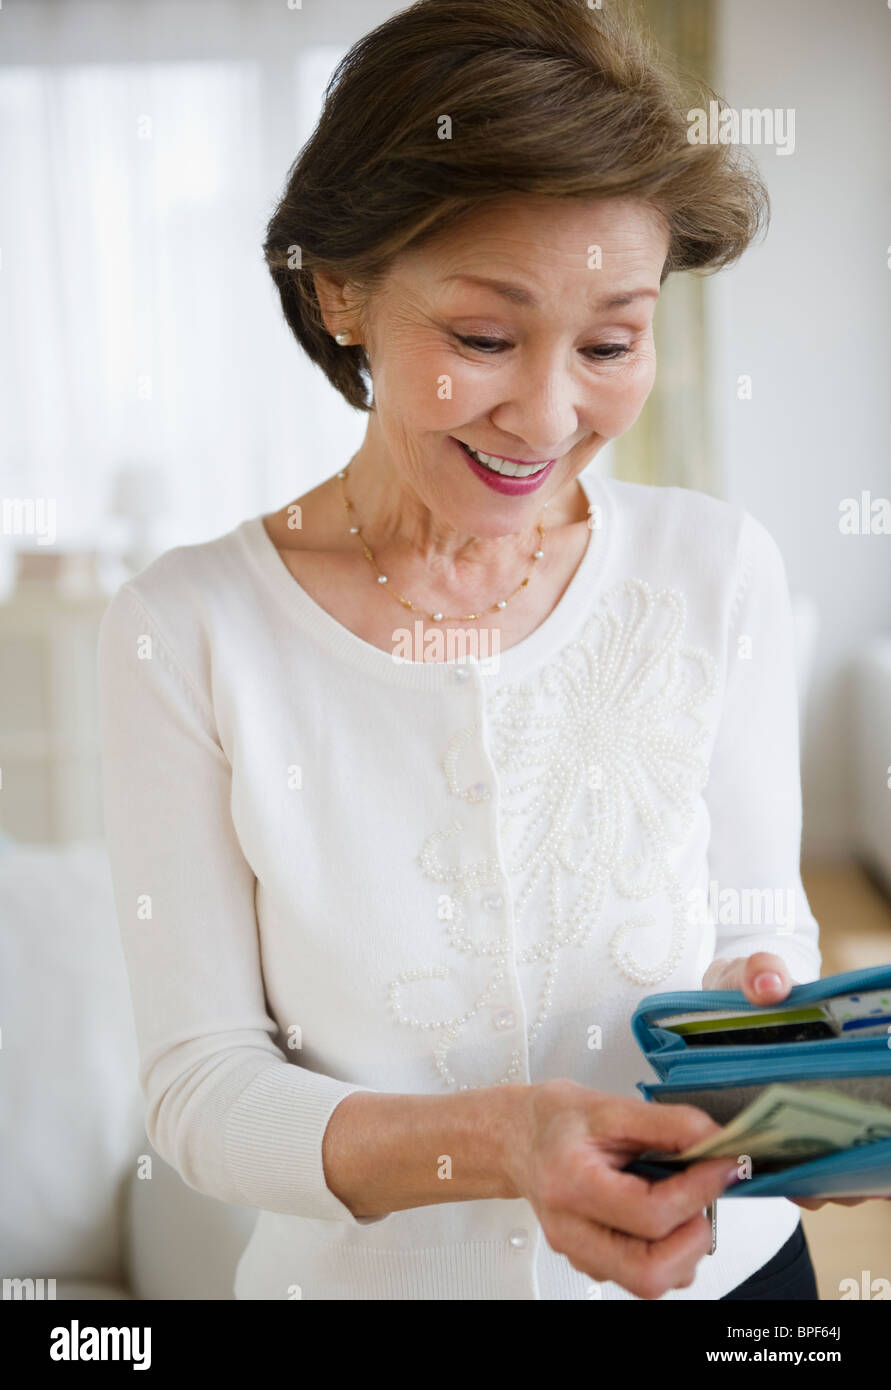 Japanese woman removing money from wallet Stock Photo